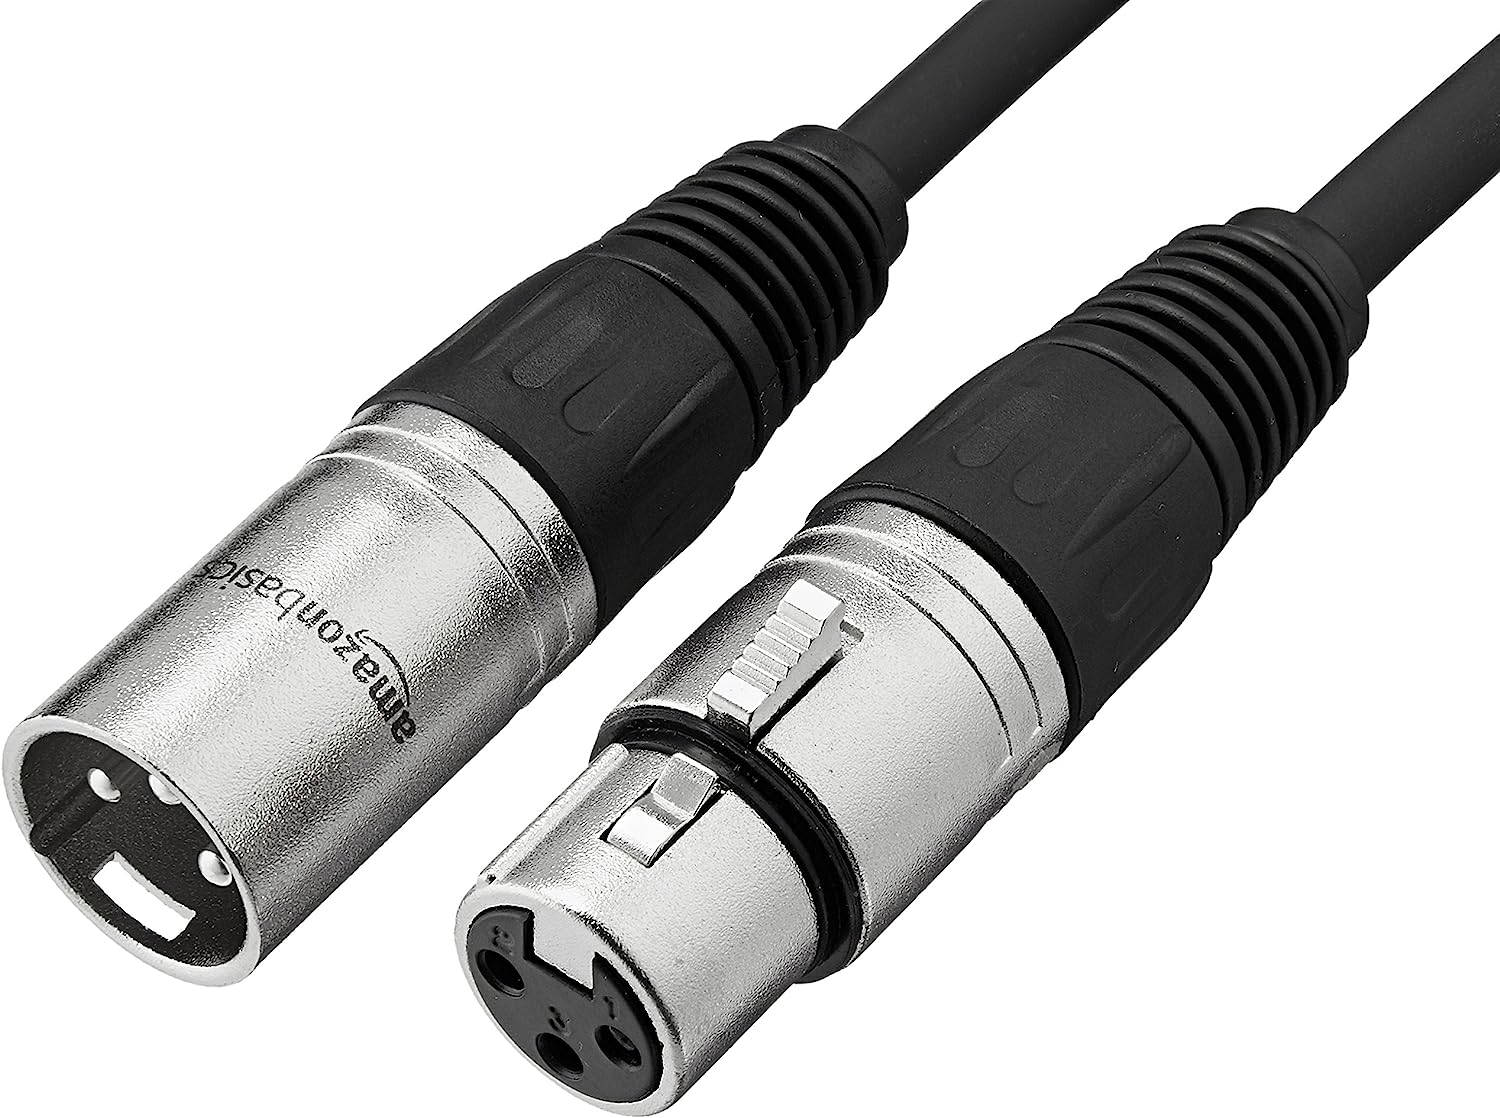 Amazon Basics XLR Microphone Cable for Speaker or PA [...]